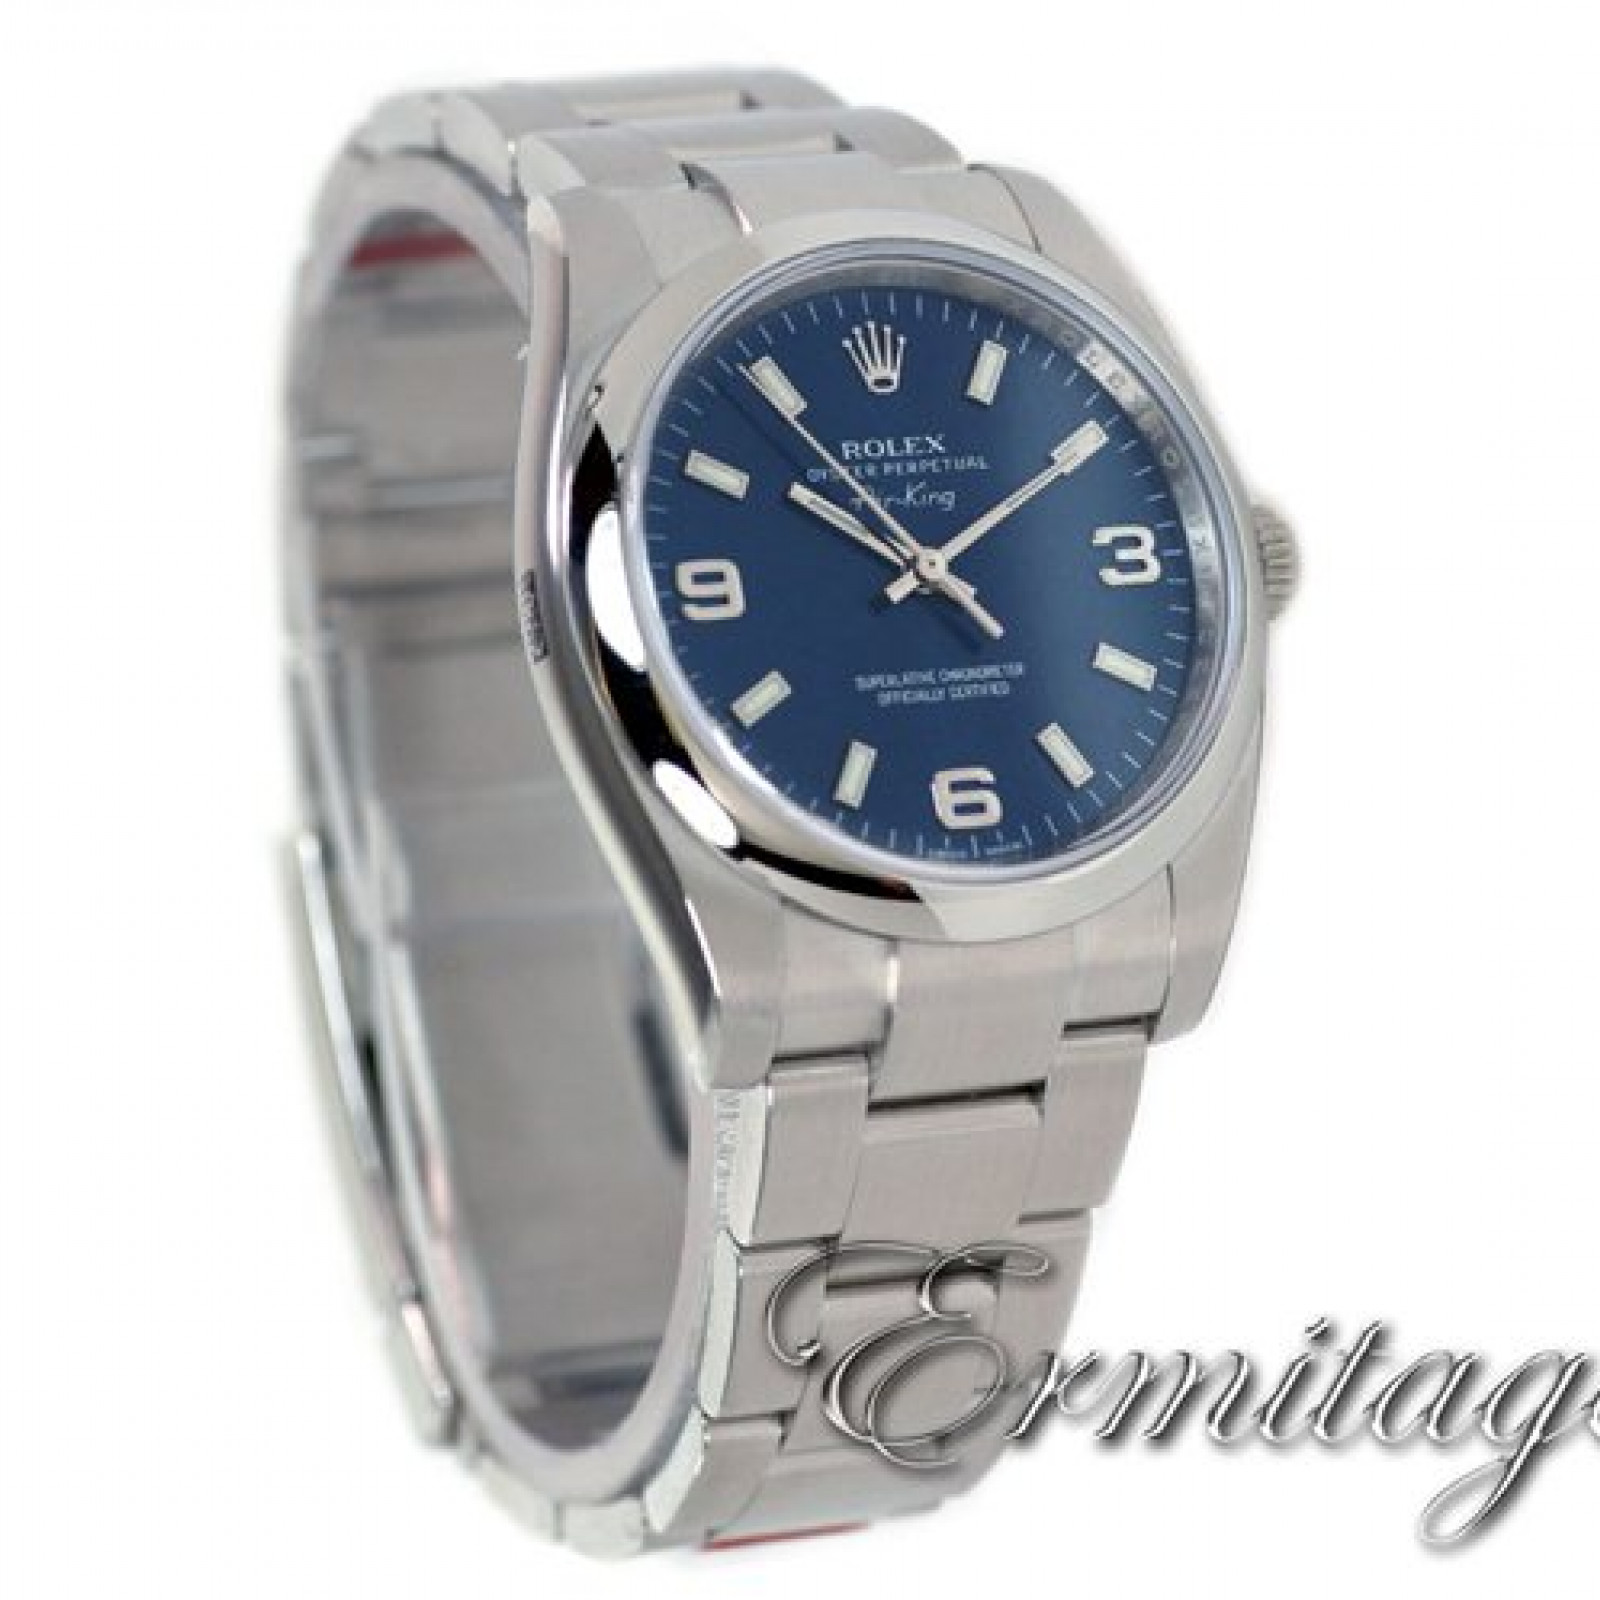 Rolex Air King 114200 Steel with Blue Dial Year 2012